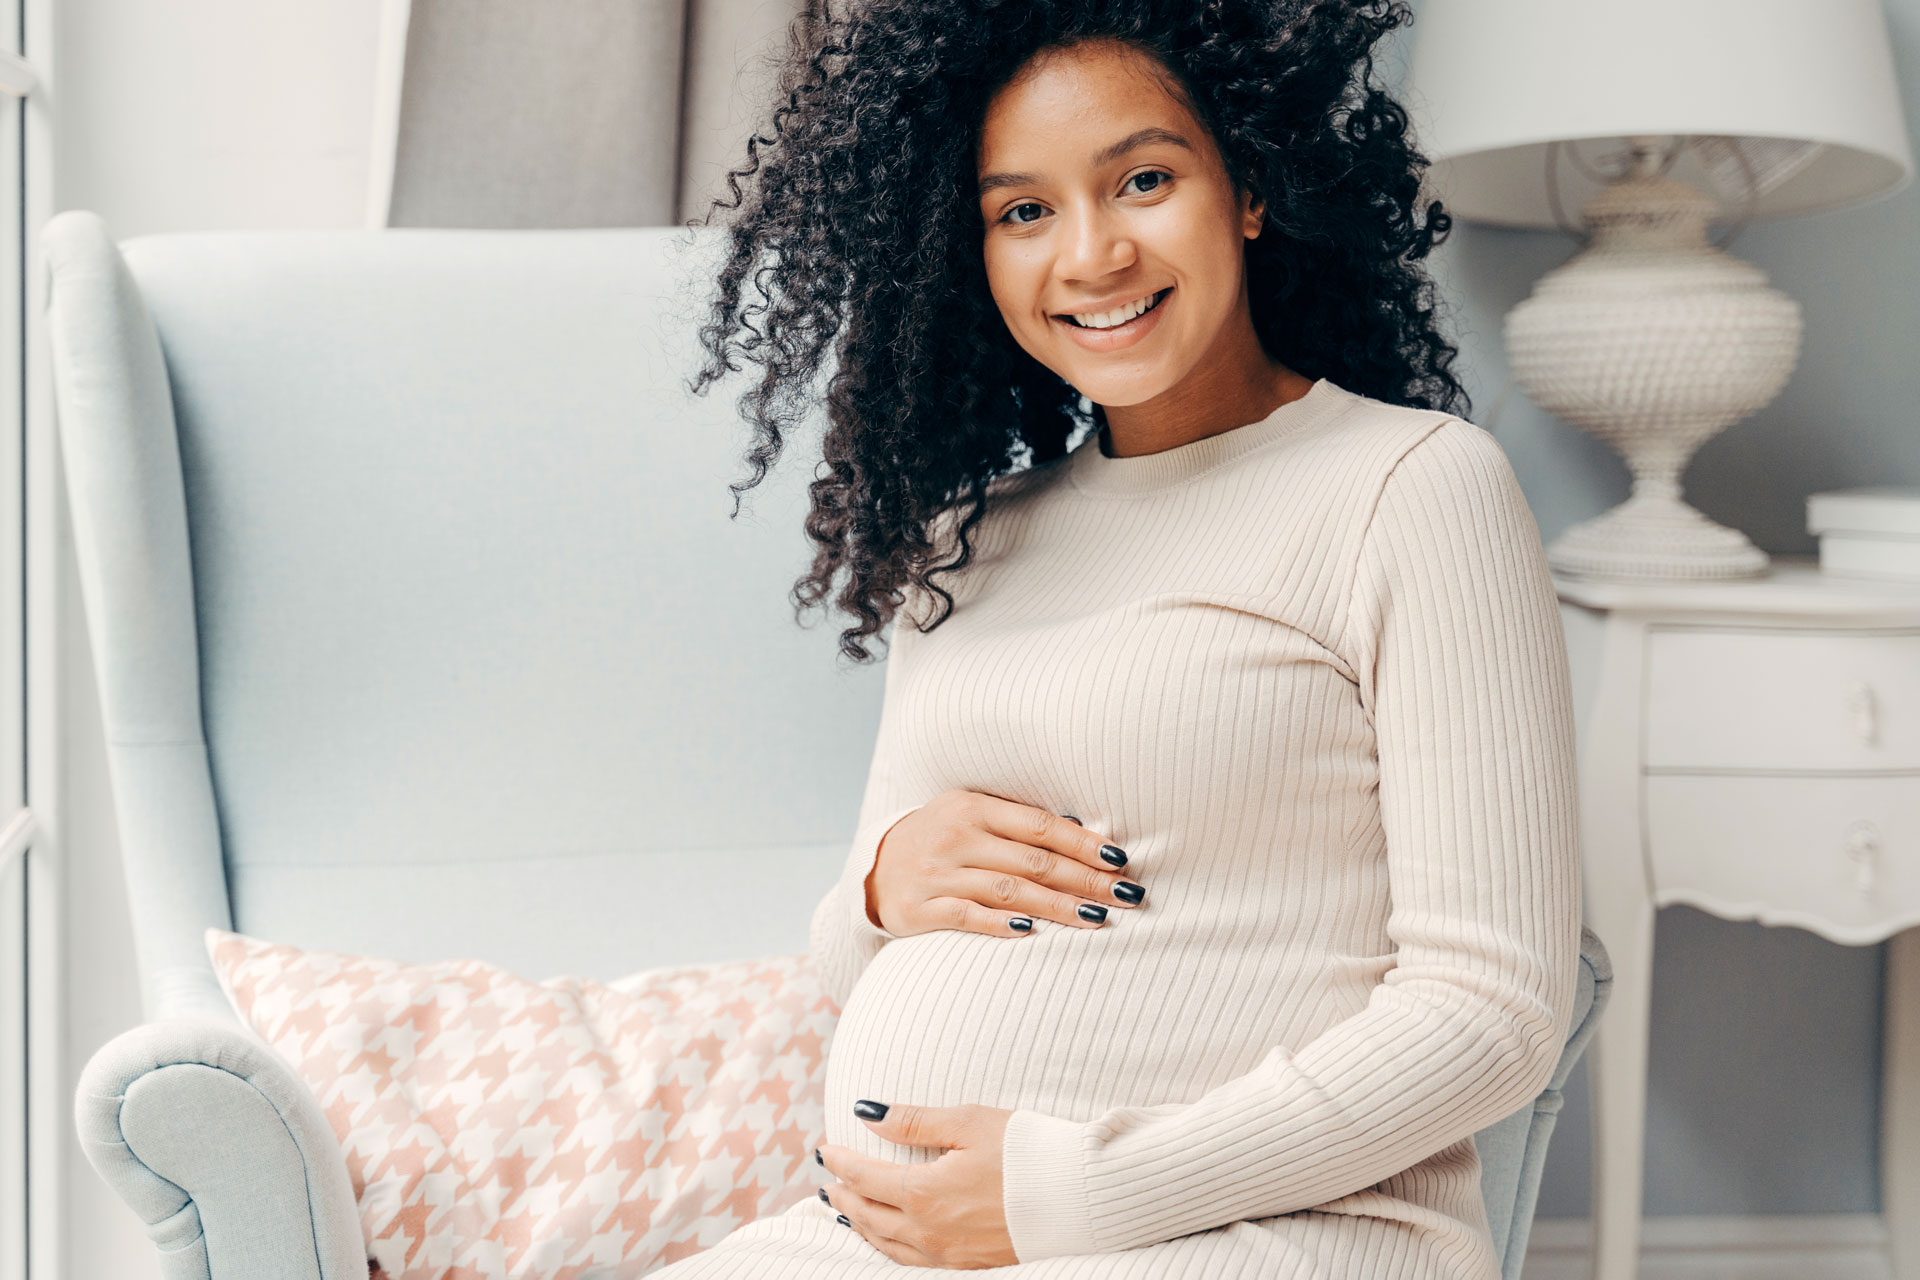 Can I have electrolysis treatments while pregnant?